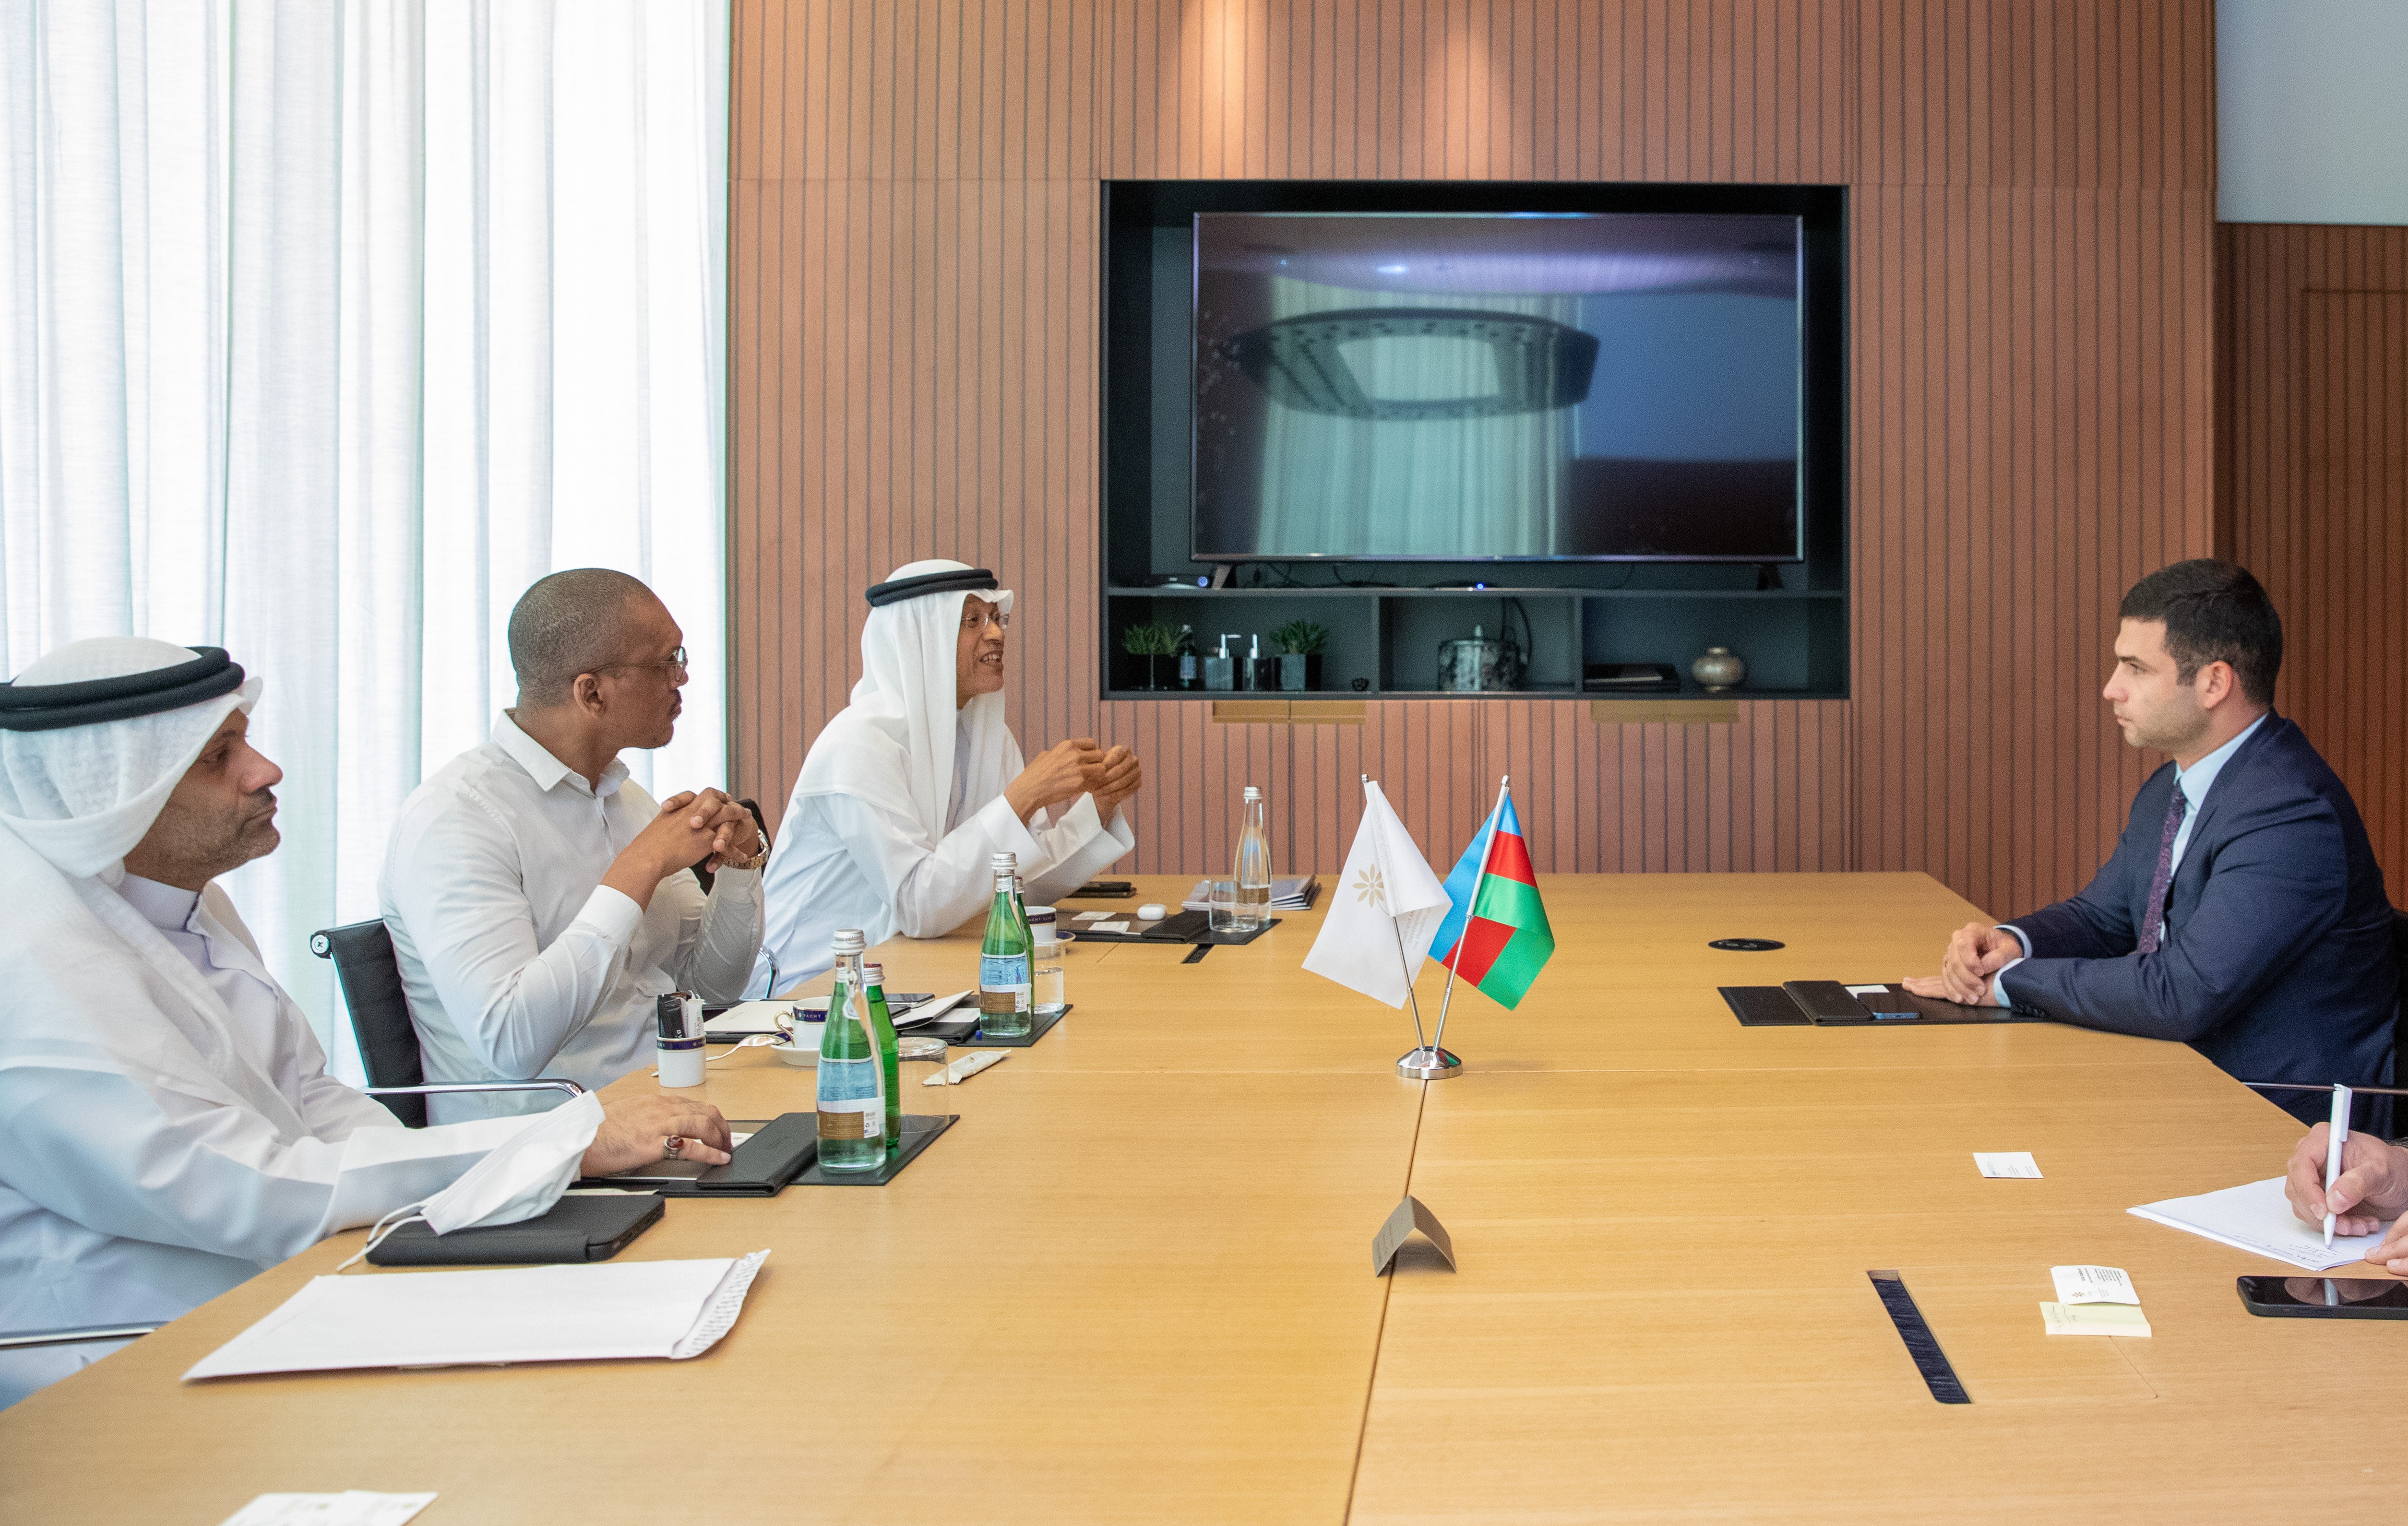 The sides exchanged views on entrepreneurship with the UAE company 